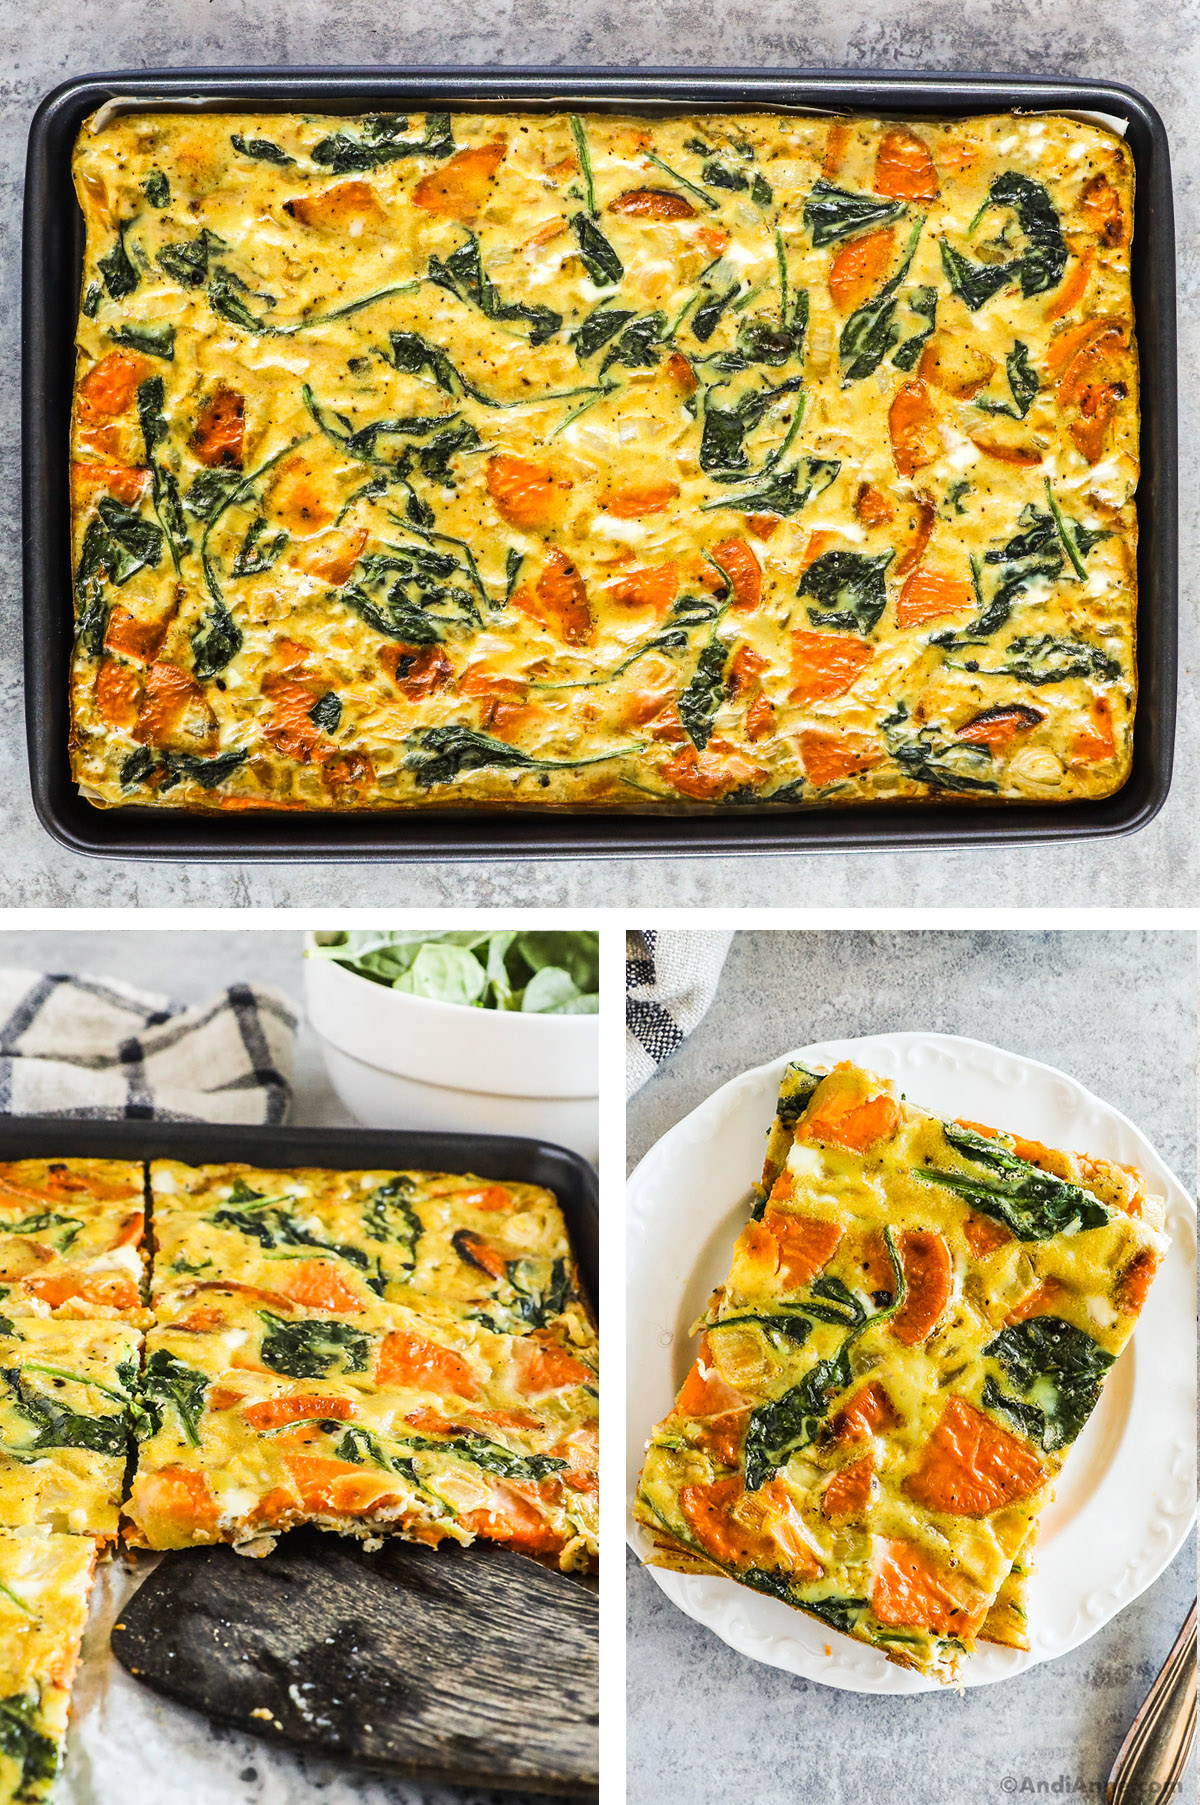 Cooked omelette with spinach and sliced sweet potato in a baking sheet, then sliced into squares and a serving on a plate.